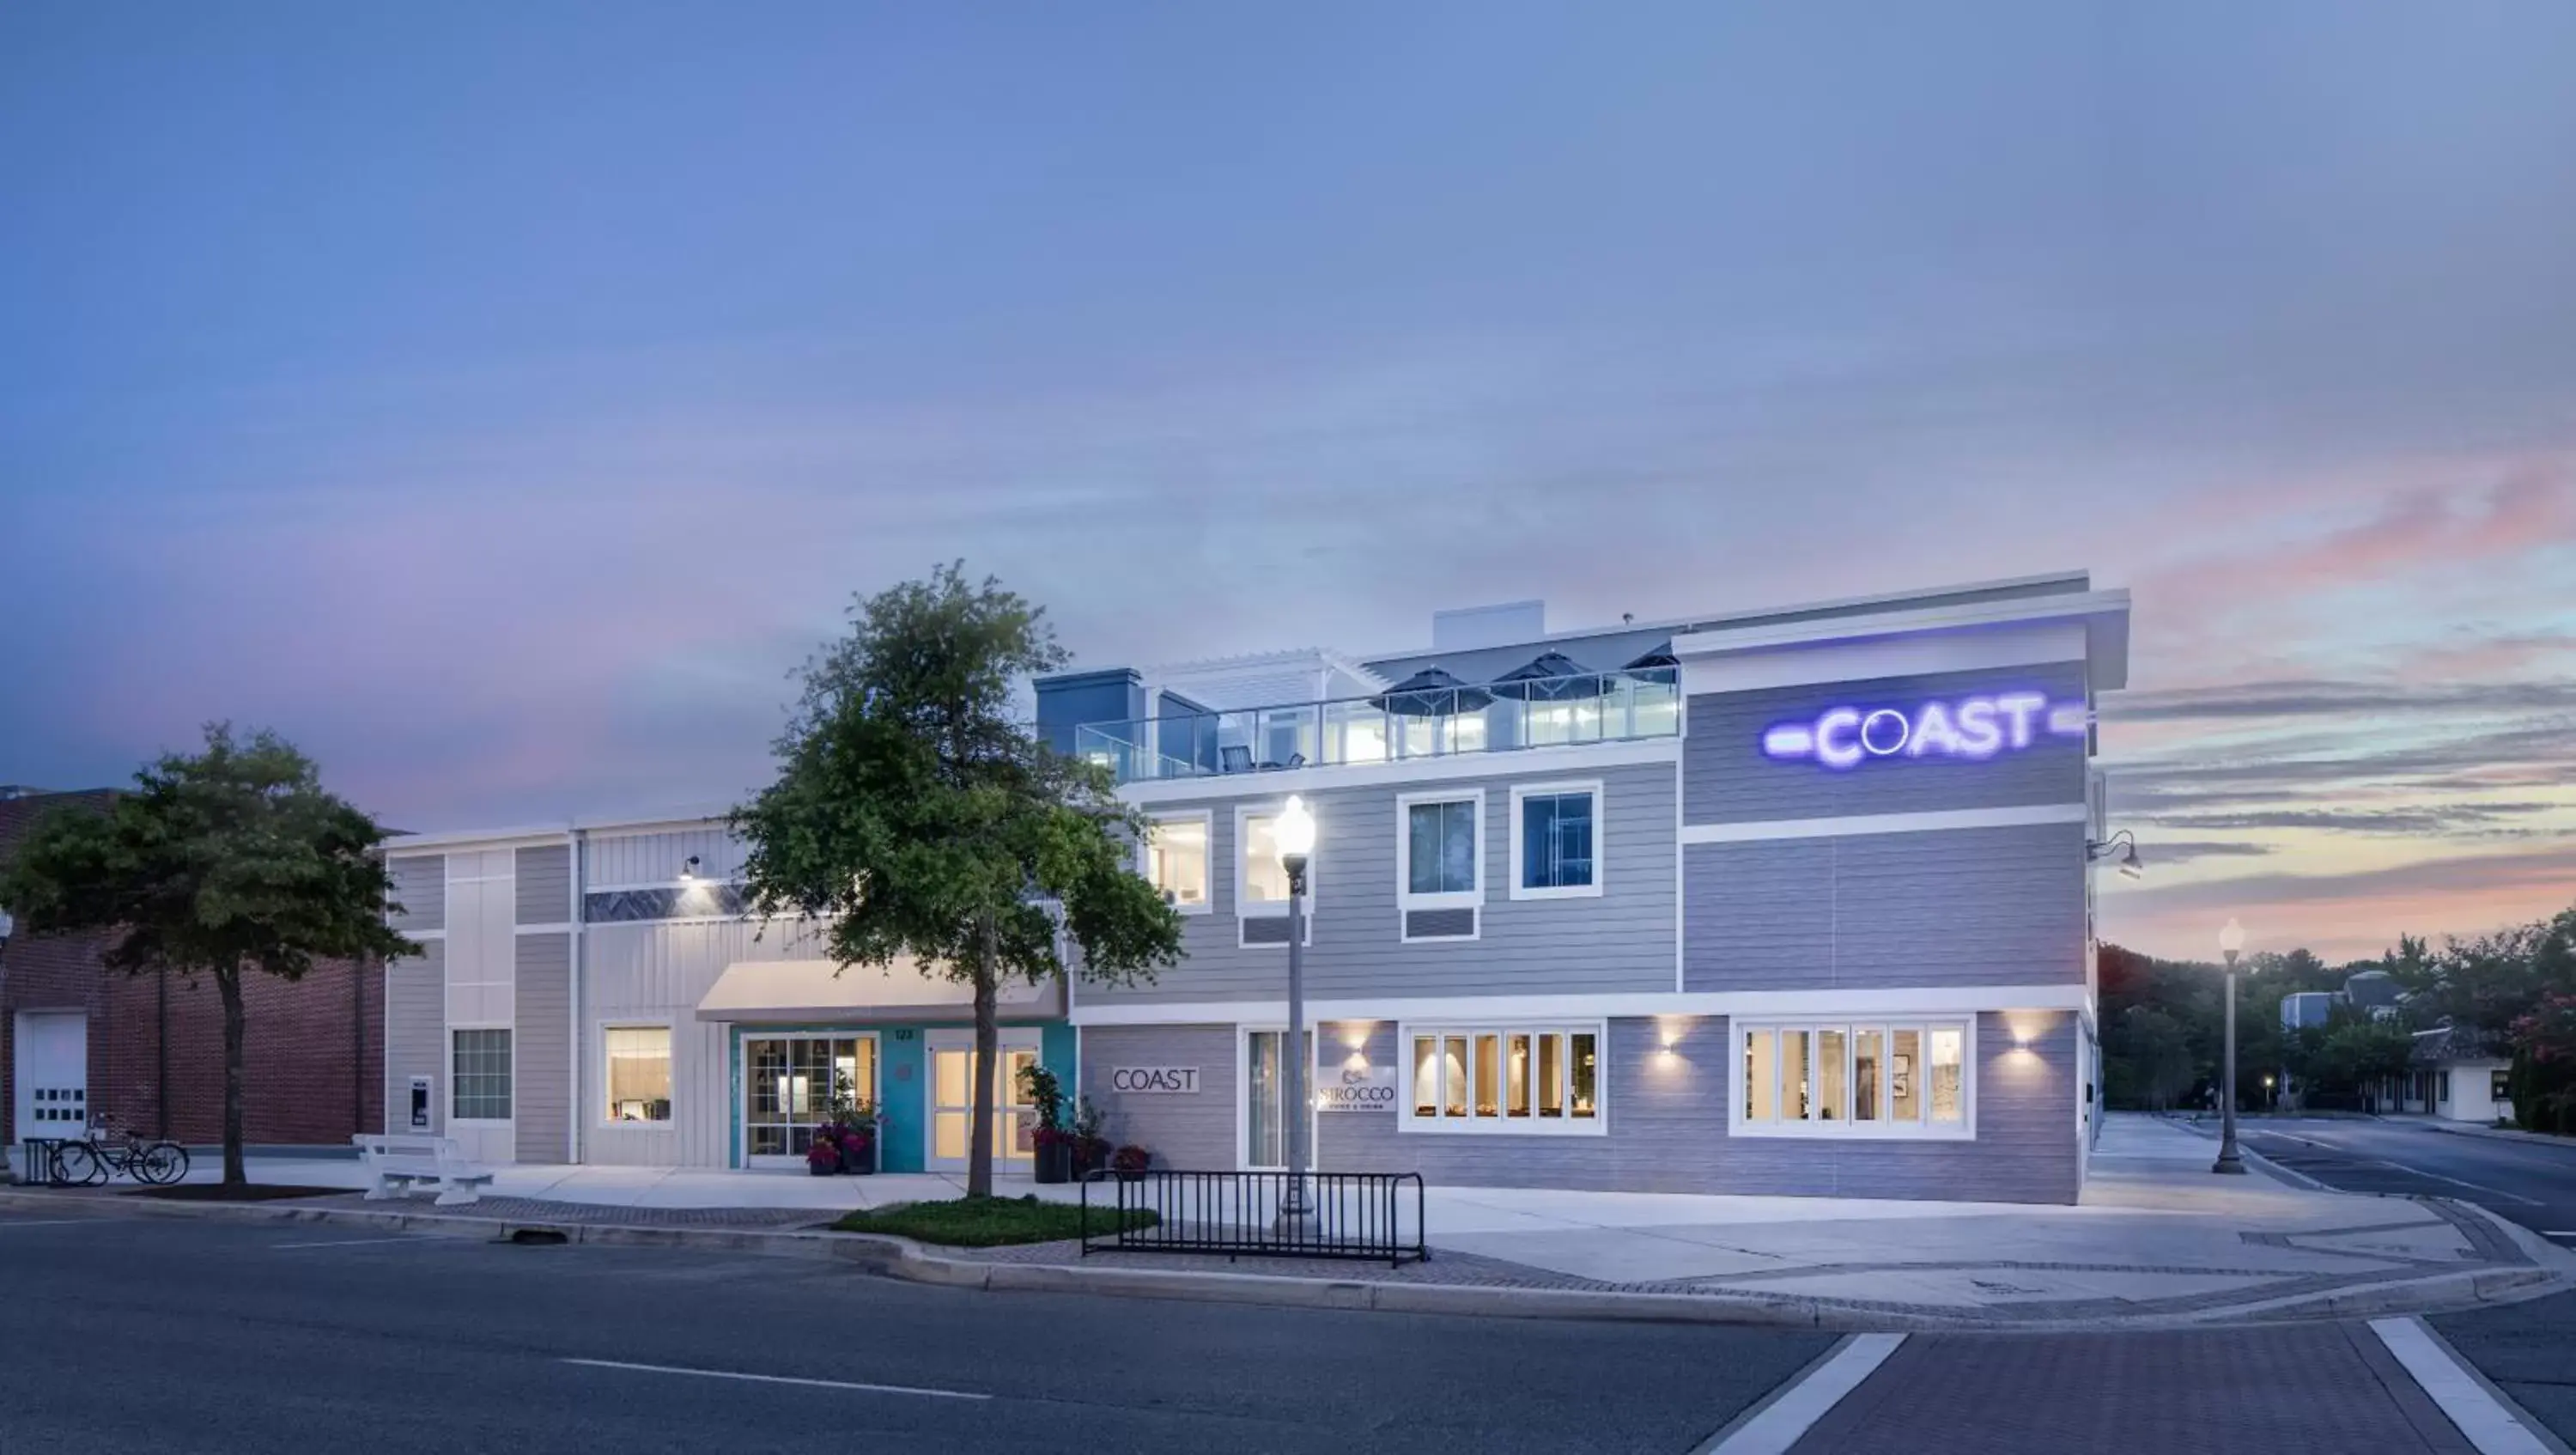 Property Building in Coast Rehoboth Beach, Tapestry Collection By Hilton